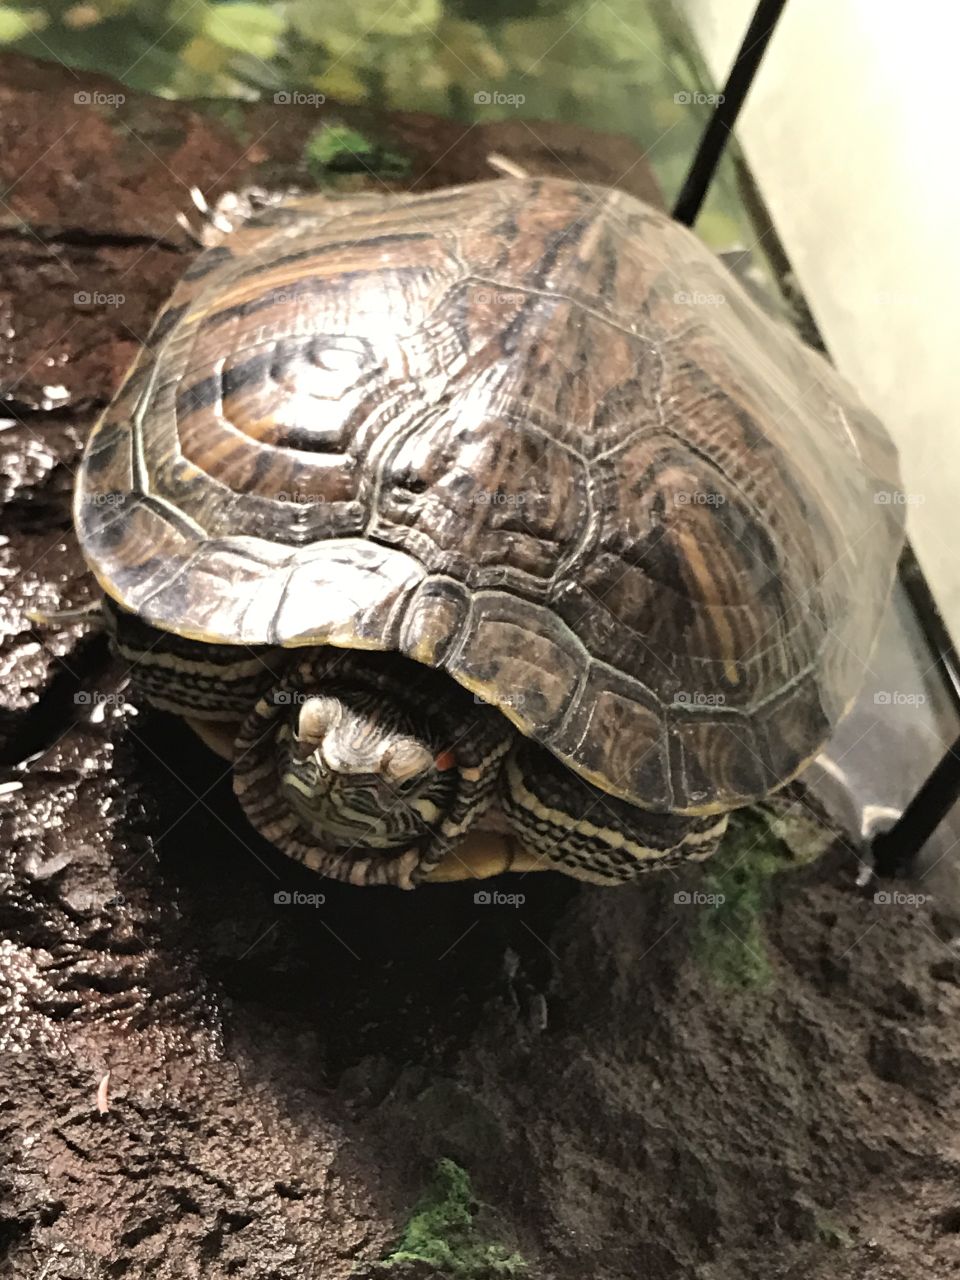 My red eared slider 